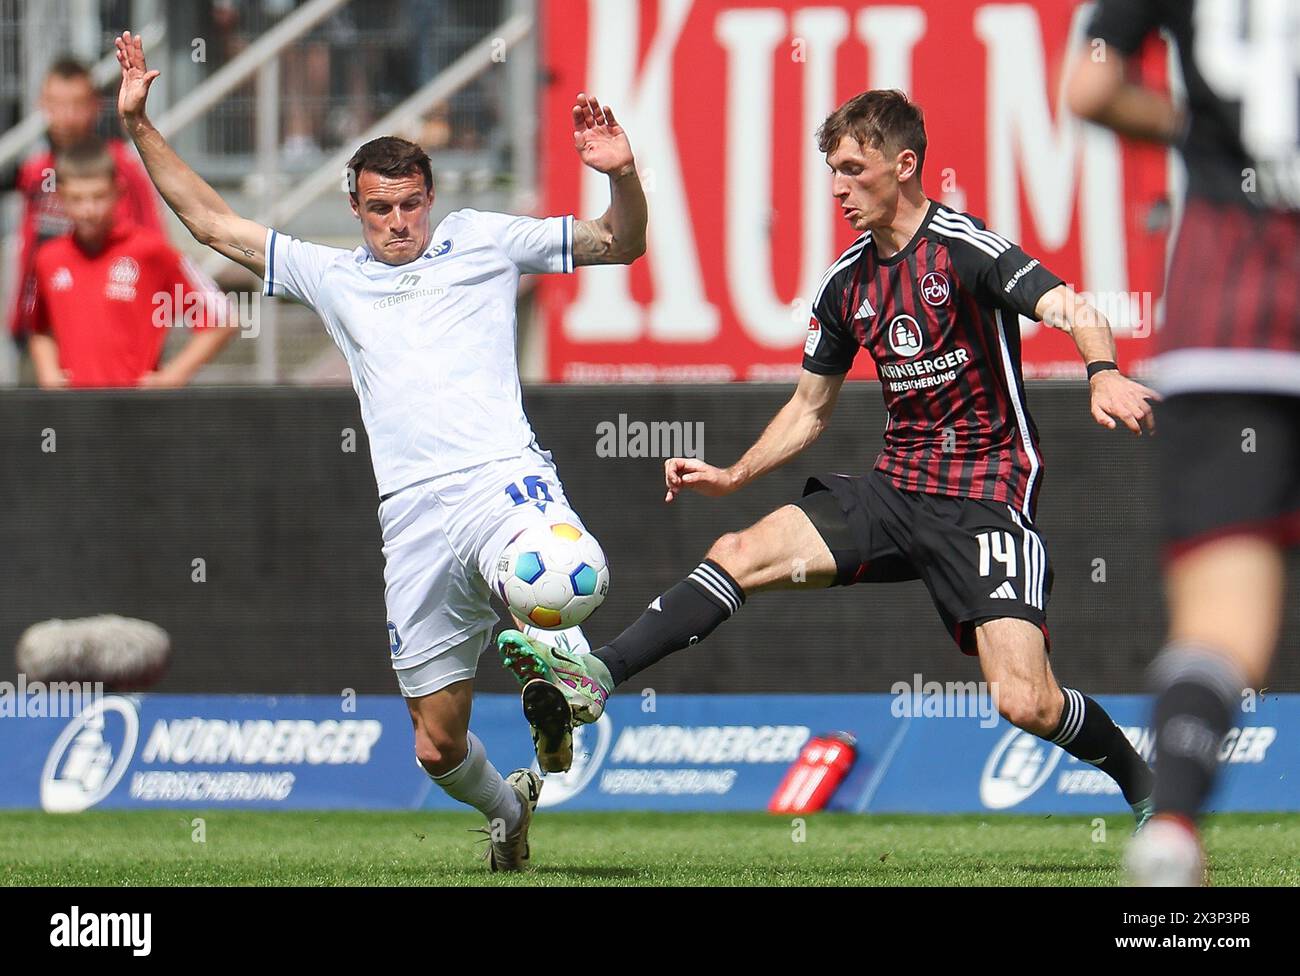 Nuremberg, Germany. 28th Apr, 2024. Soccer: Bundesliga 2, 1. FC Nürnberg - Karlsruher SC, Matchday 31, Max-Morlock-Stadion. Karlsruhe's Marvin Wanitzek (l) and Nuremberg's Benjamin Goller in action. Credit: Daniel Löb/dpa - IMPORTANT NOTE: In accordance with the regulations of the DFL German Football League and the DFB German Football Association, it is prohibited to utilize or have utilized photographs taken in the stadium and/or of the match in the form of sequential images and/or video-like photo series./dpa/Alamy Live News Stock Photo